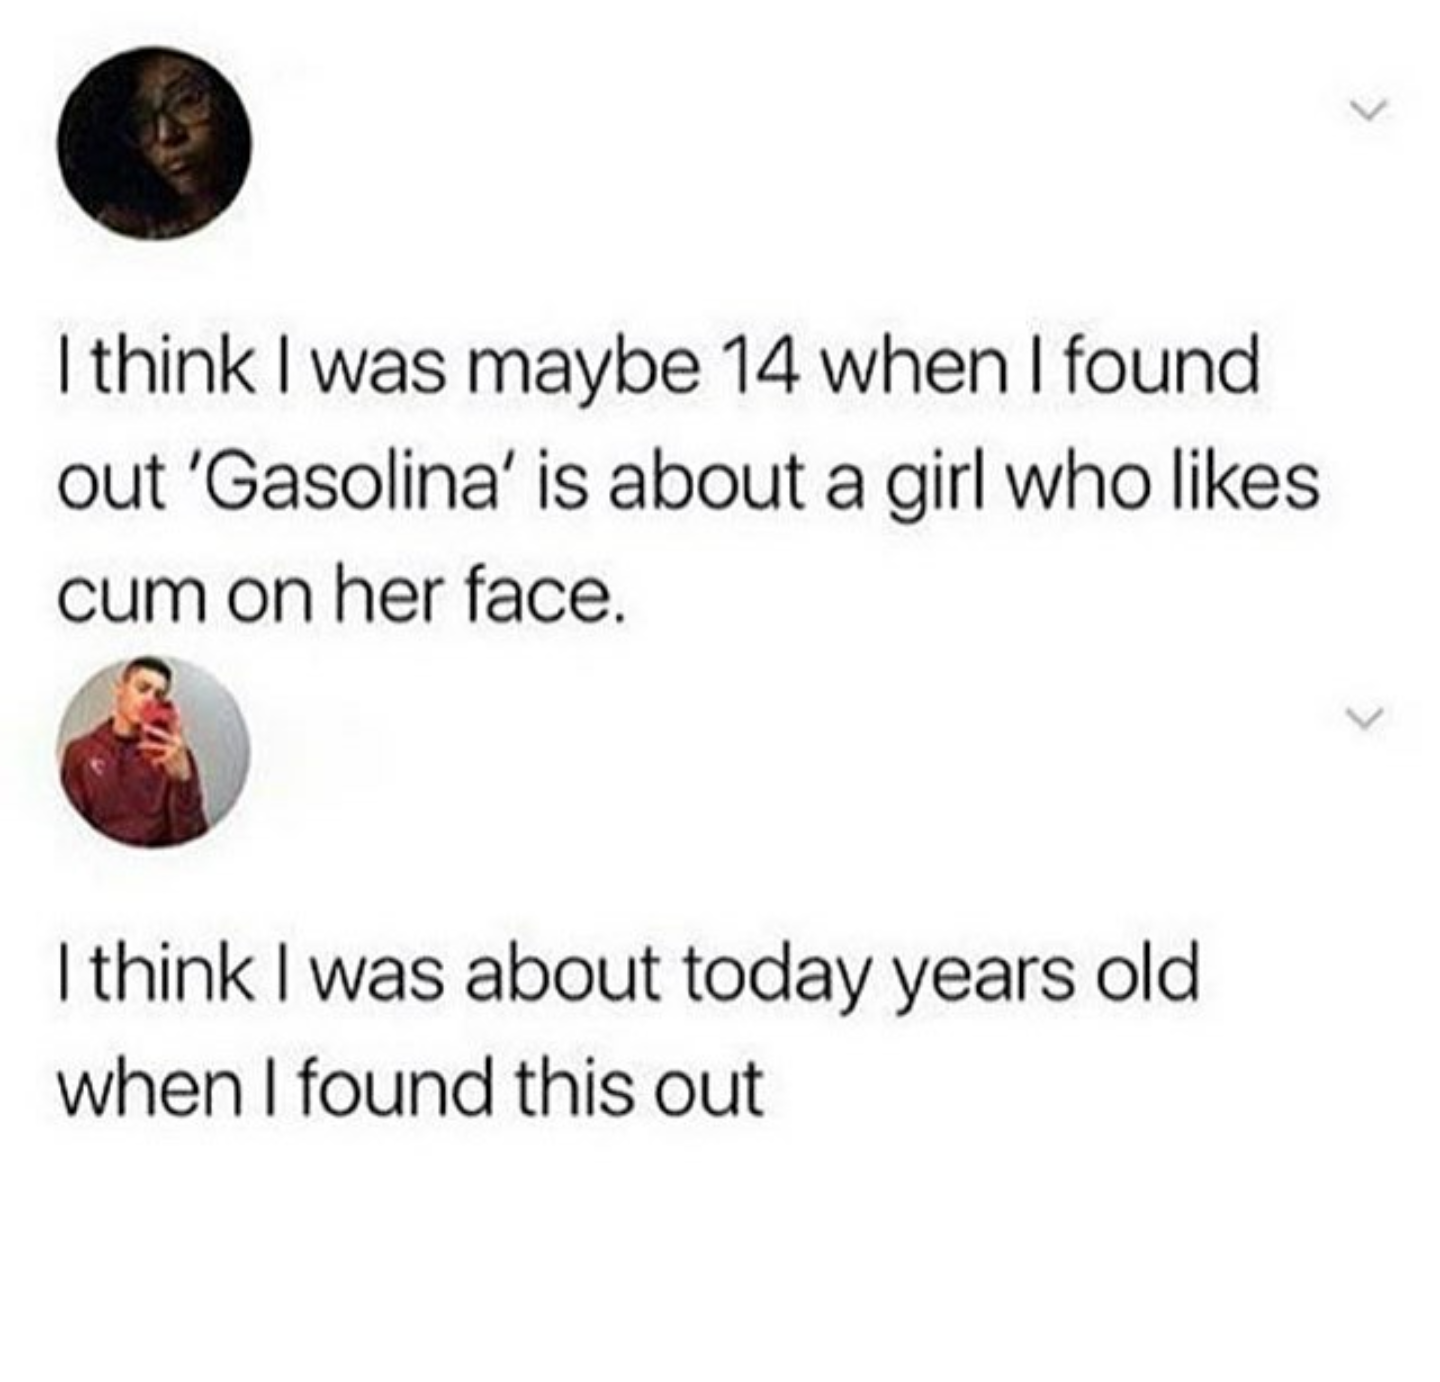 meme stream - gasolina meaning meme - I think I was maybe 14 when I found out 'Gasolina' is about a girl who cum on her face. I think I was about today years old when I found this out